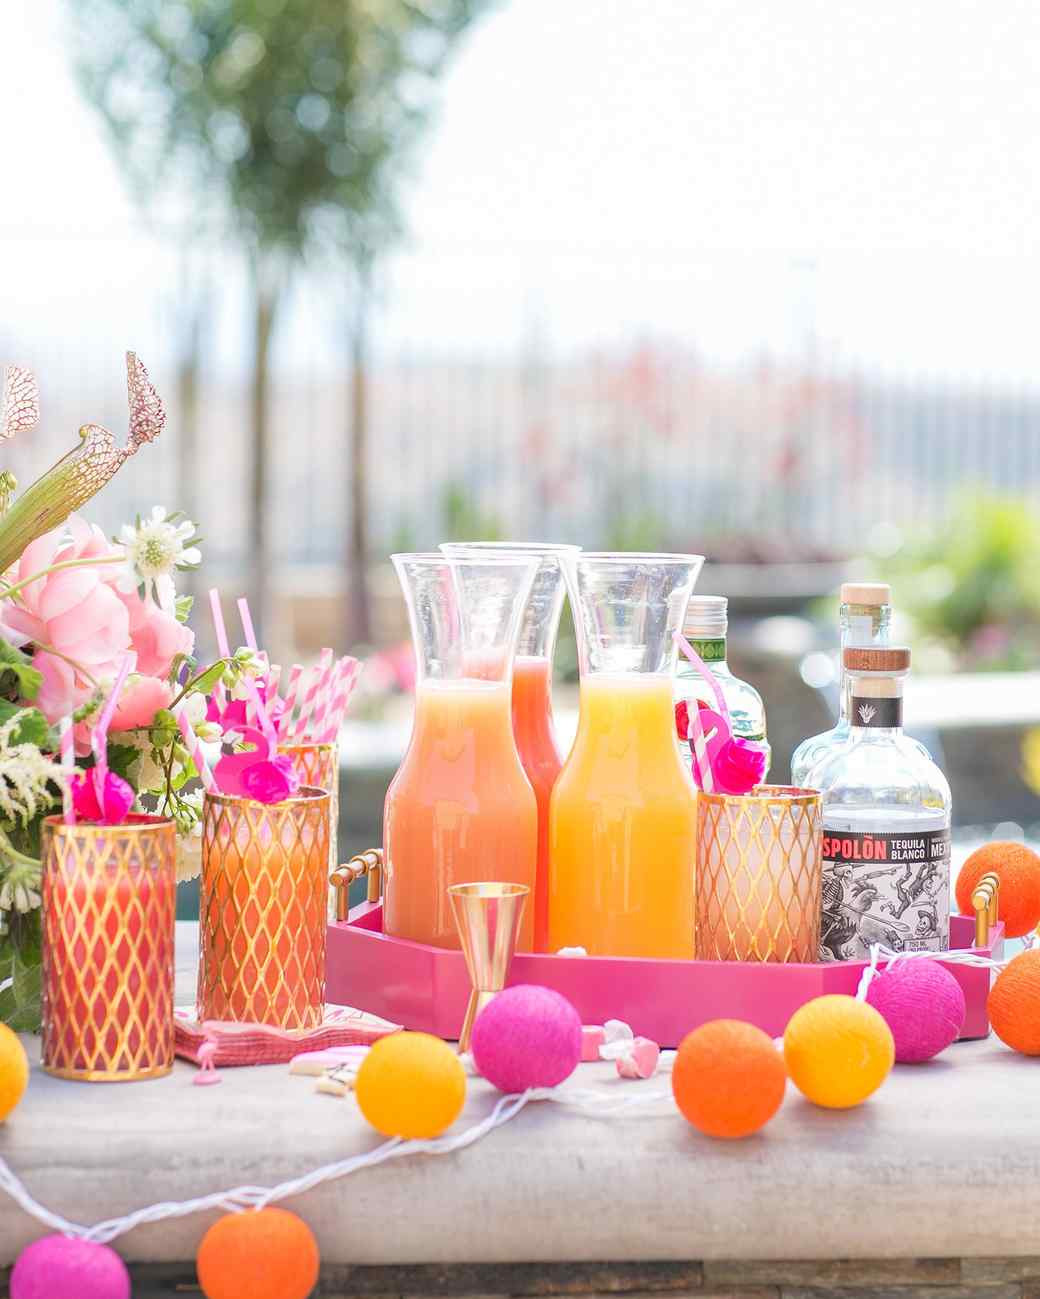 Decorating Ideas For A Summer Party
 Summer Party Ideas and Decorations